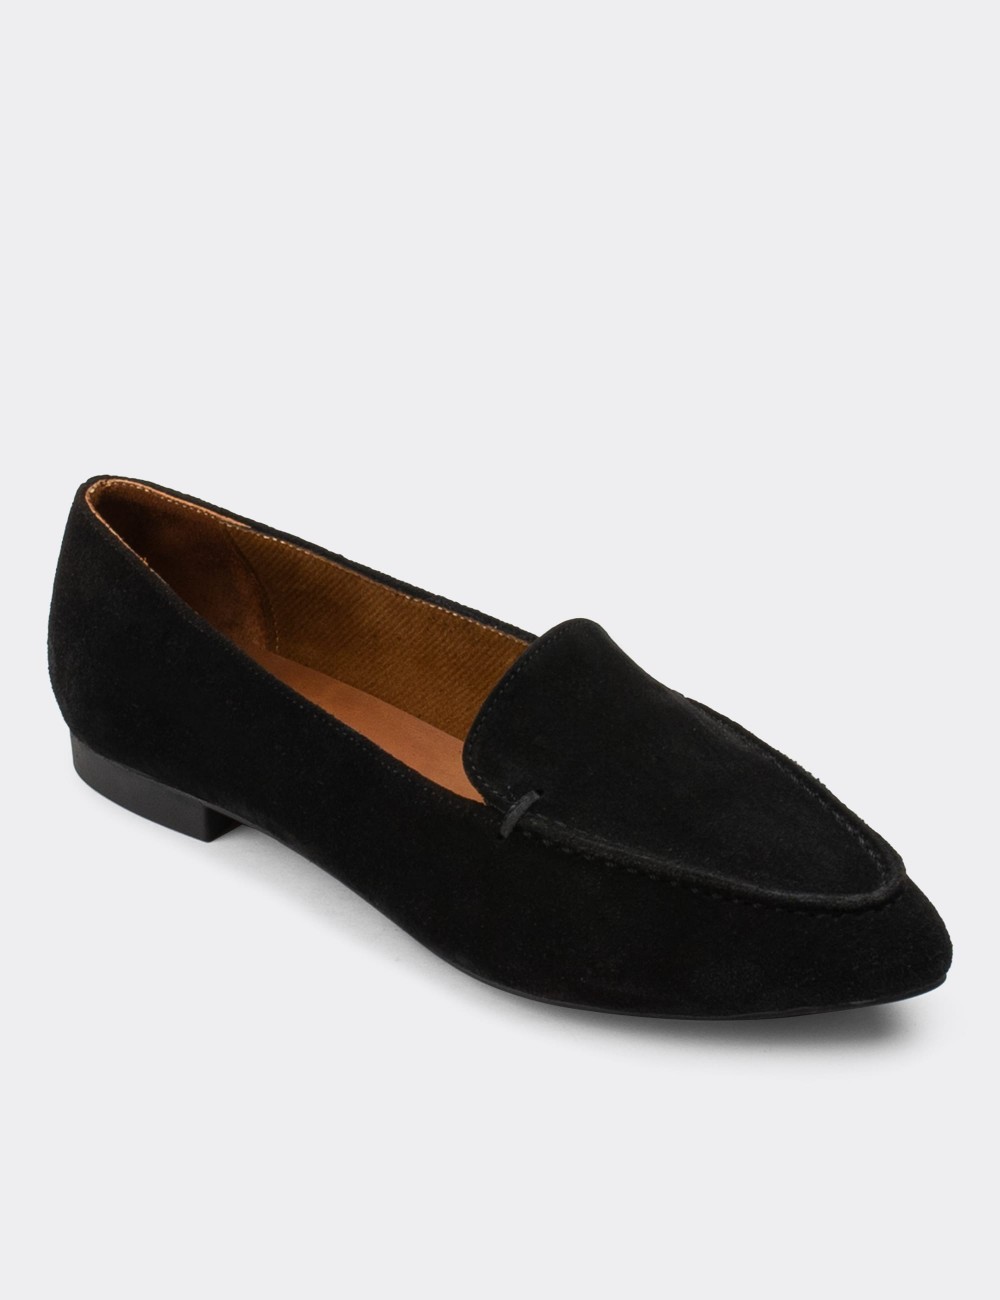 Black Suede Leather Loafers - 01899ZSYHC01